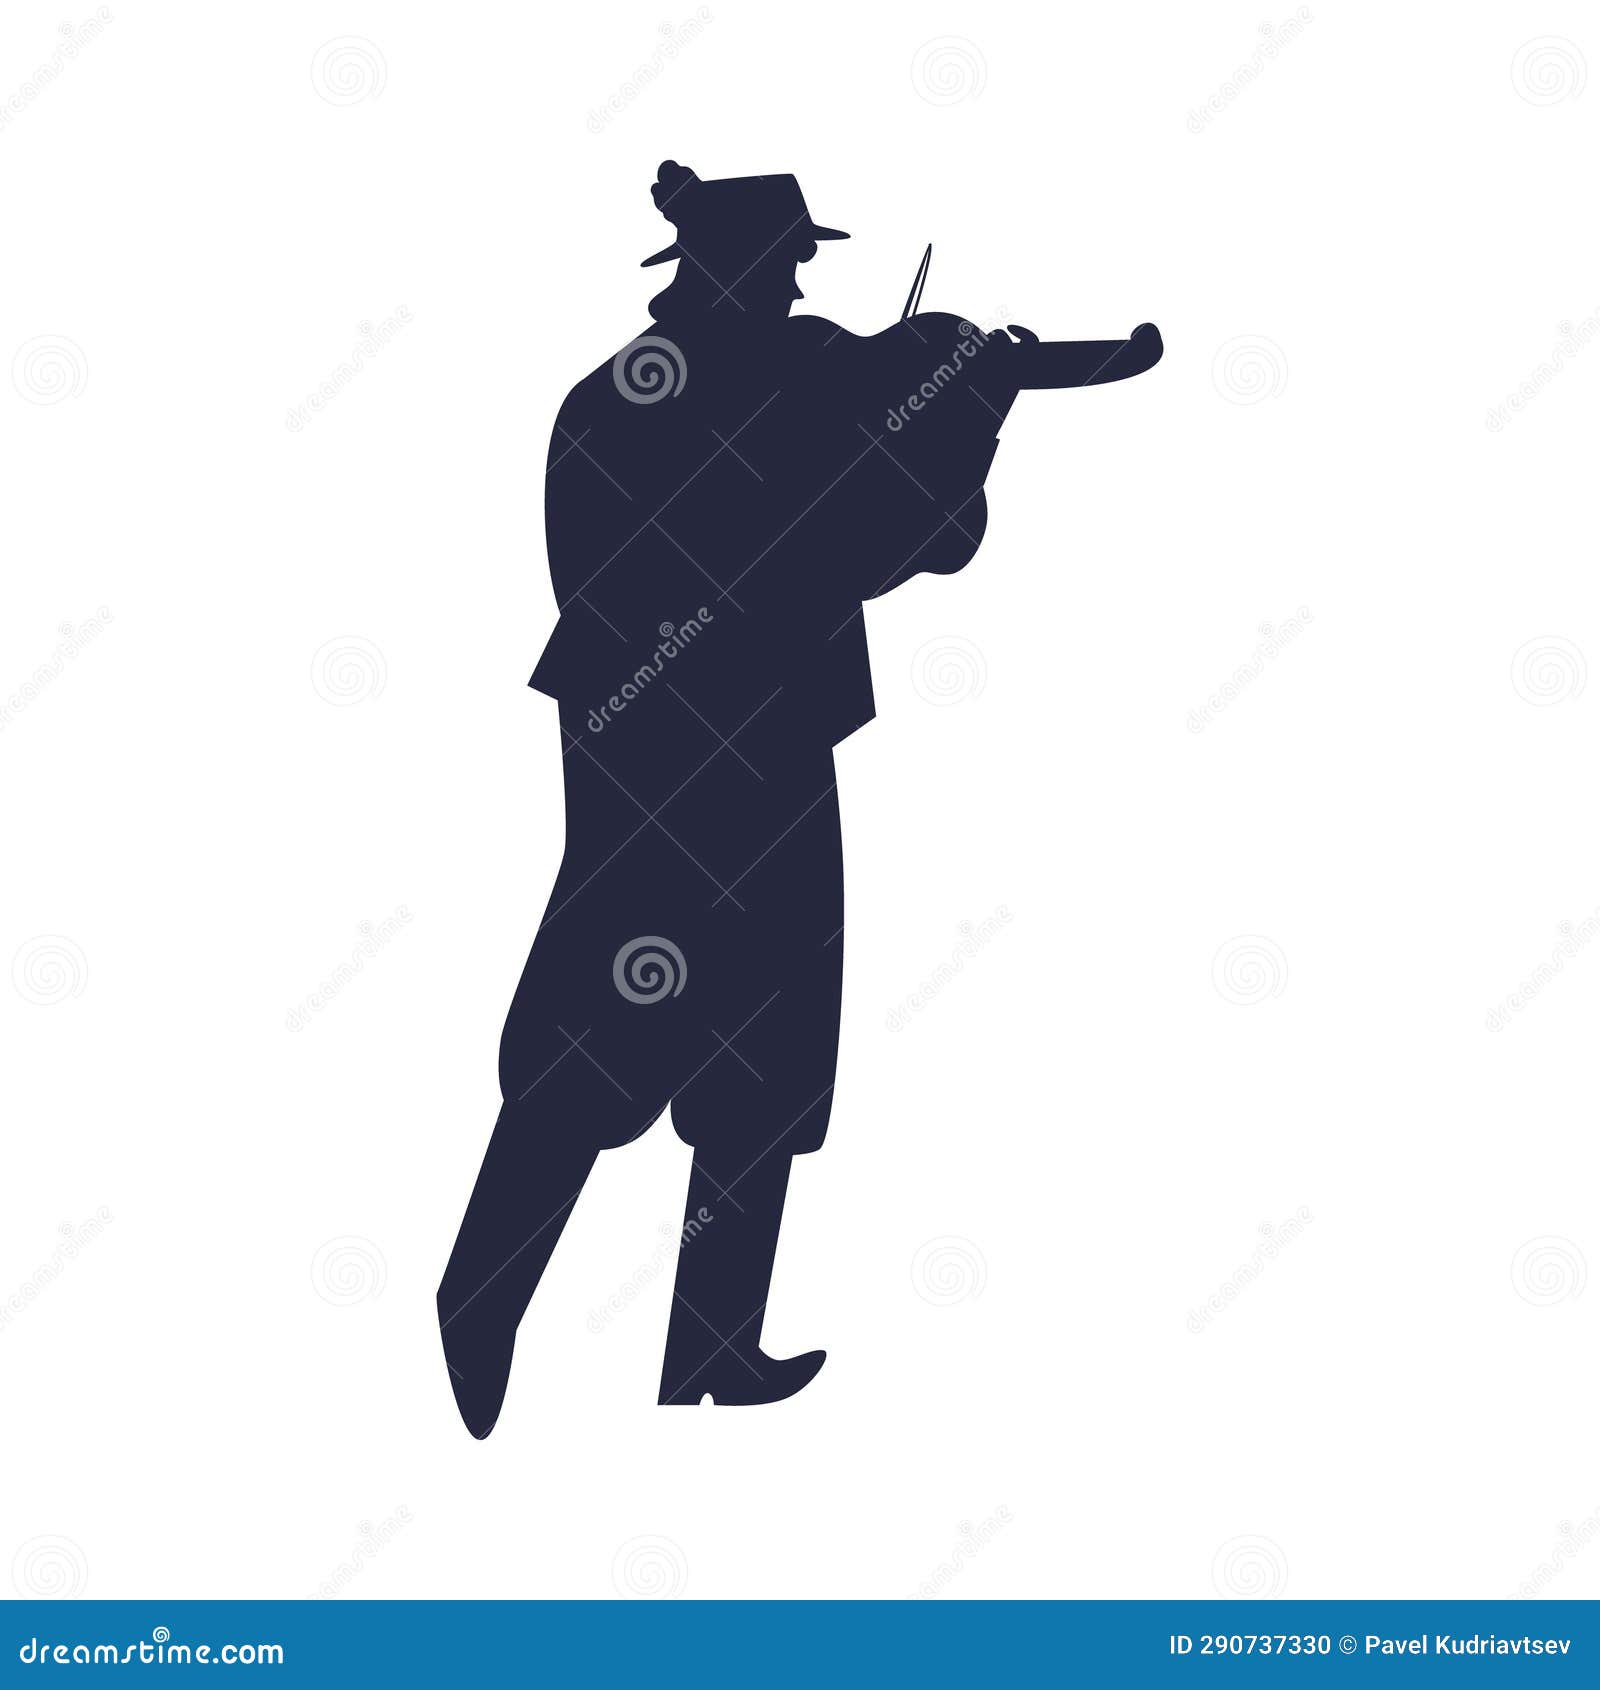 Gypsy Man Black Silhouette Playing Music on Violin Vector Illustration ...